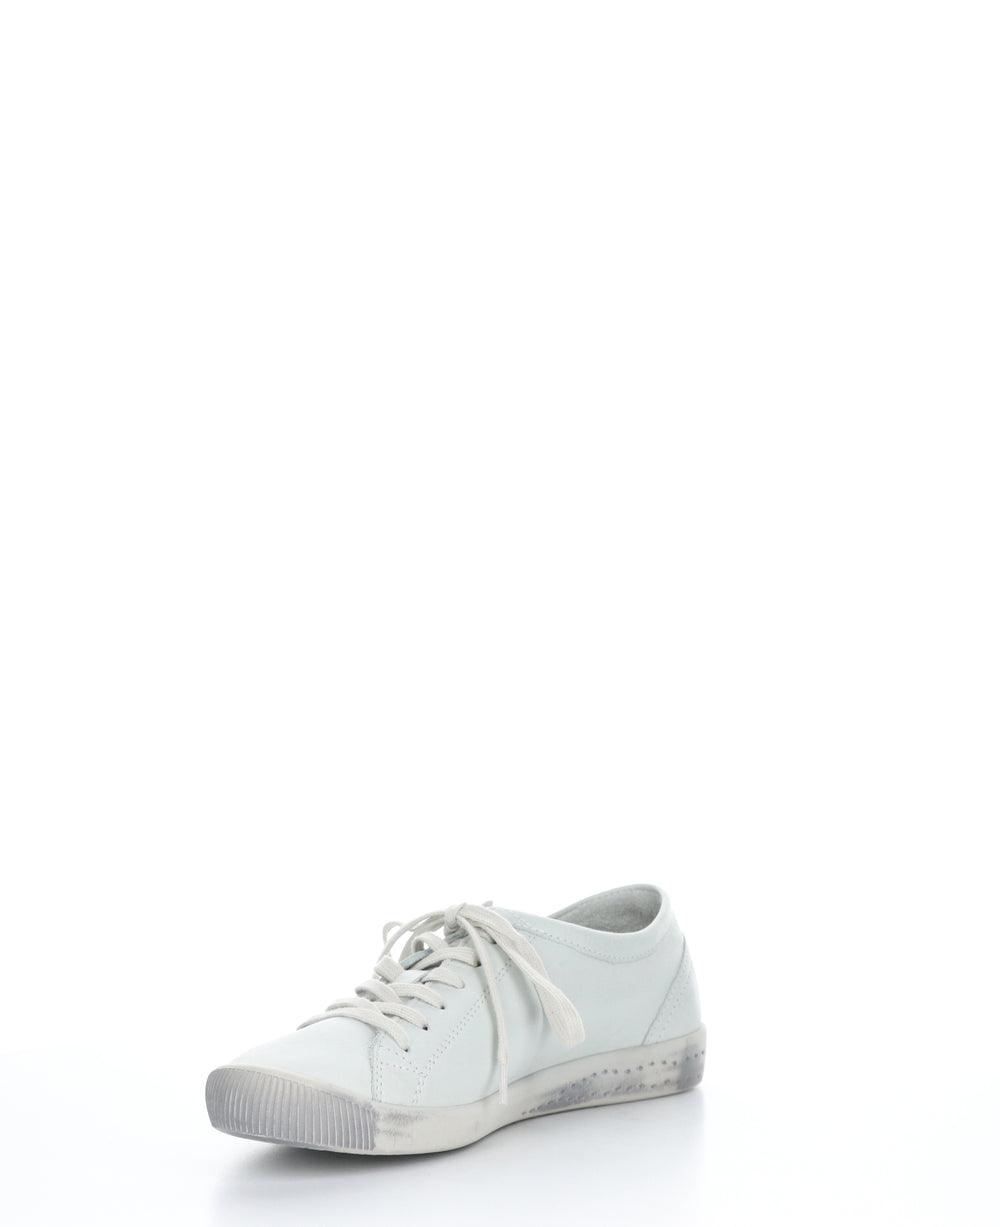 ISLA Smooth White Lace-up Trainers